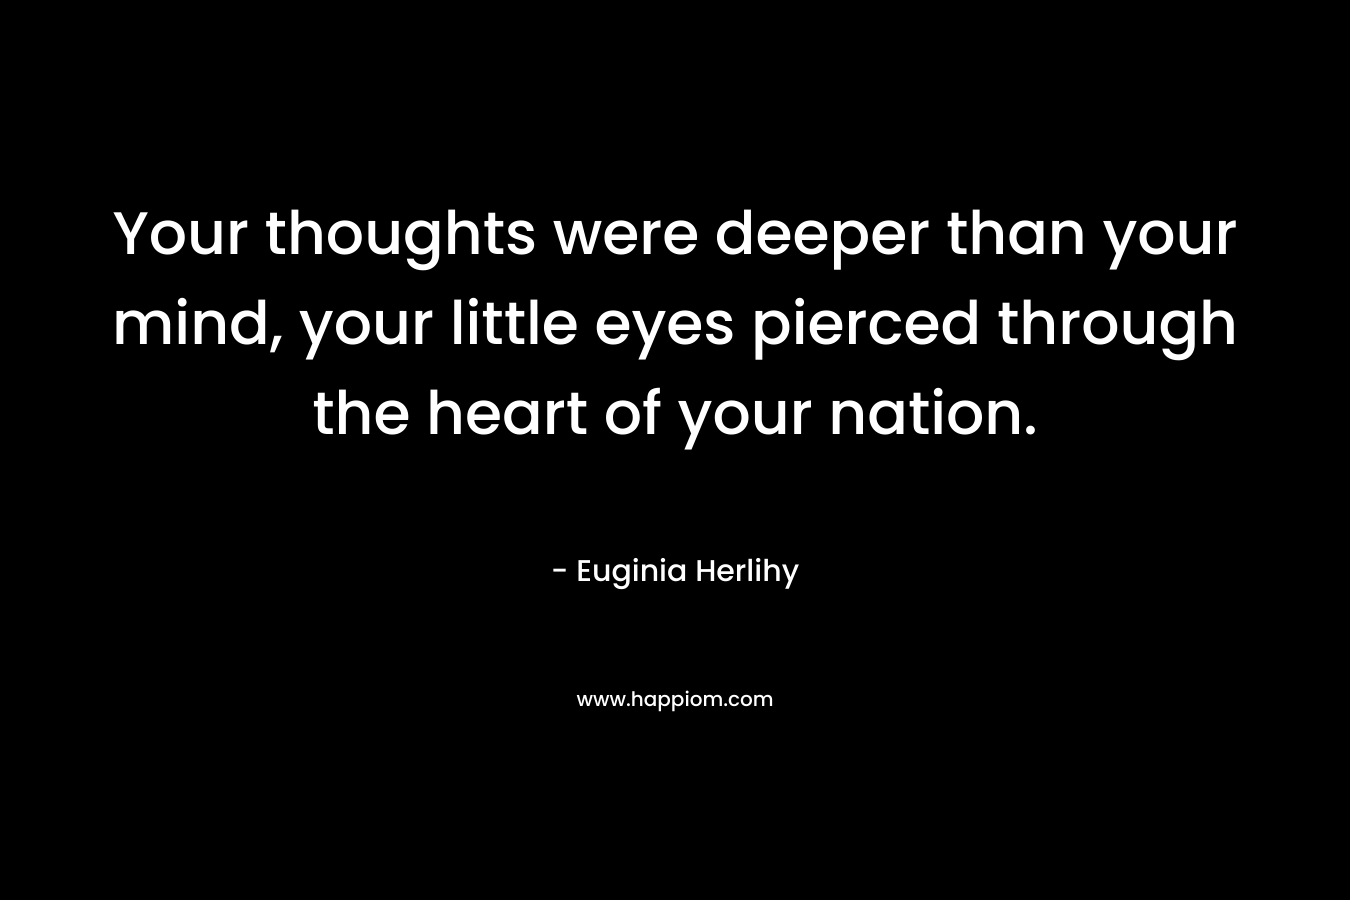 Your thoughts were deeper than your mind, your little eyes pierced through the heart of your nation. – Euginia Herlihy